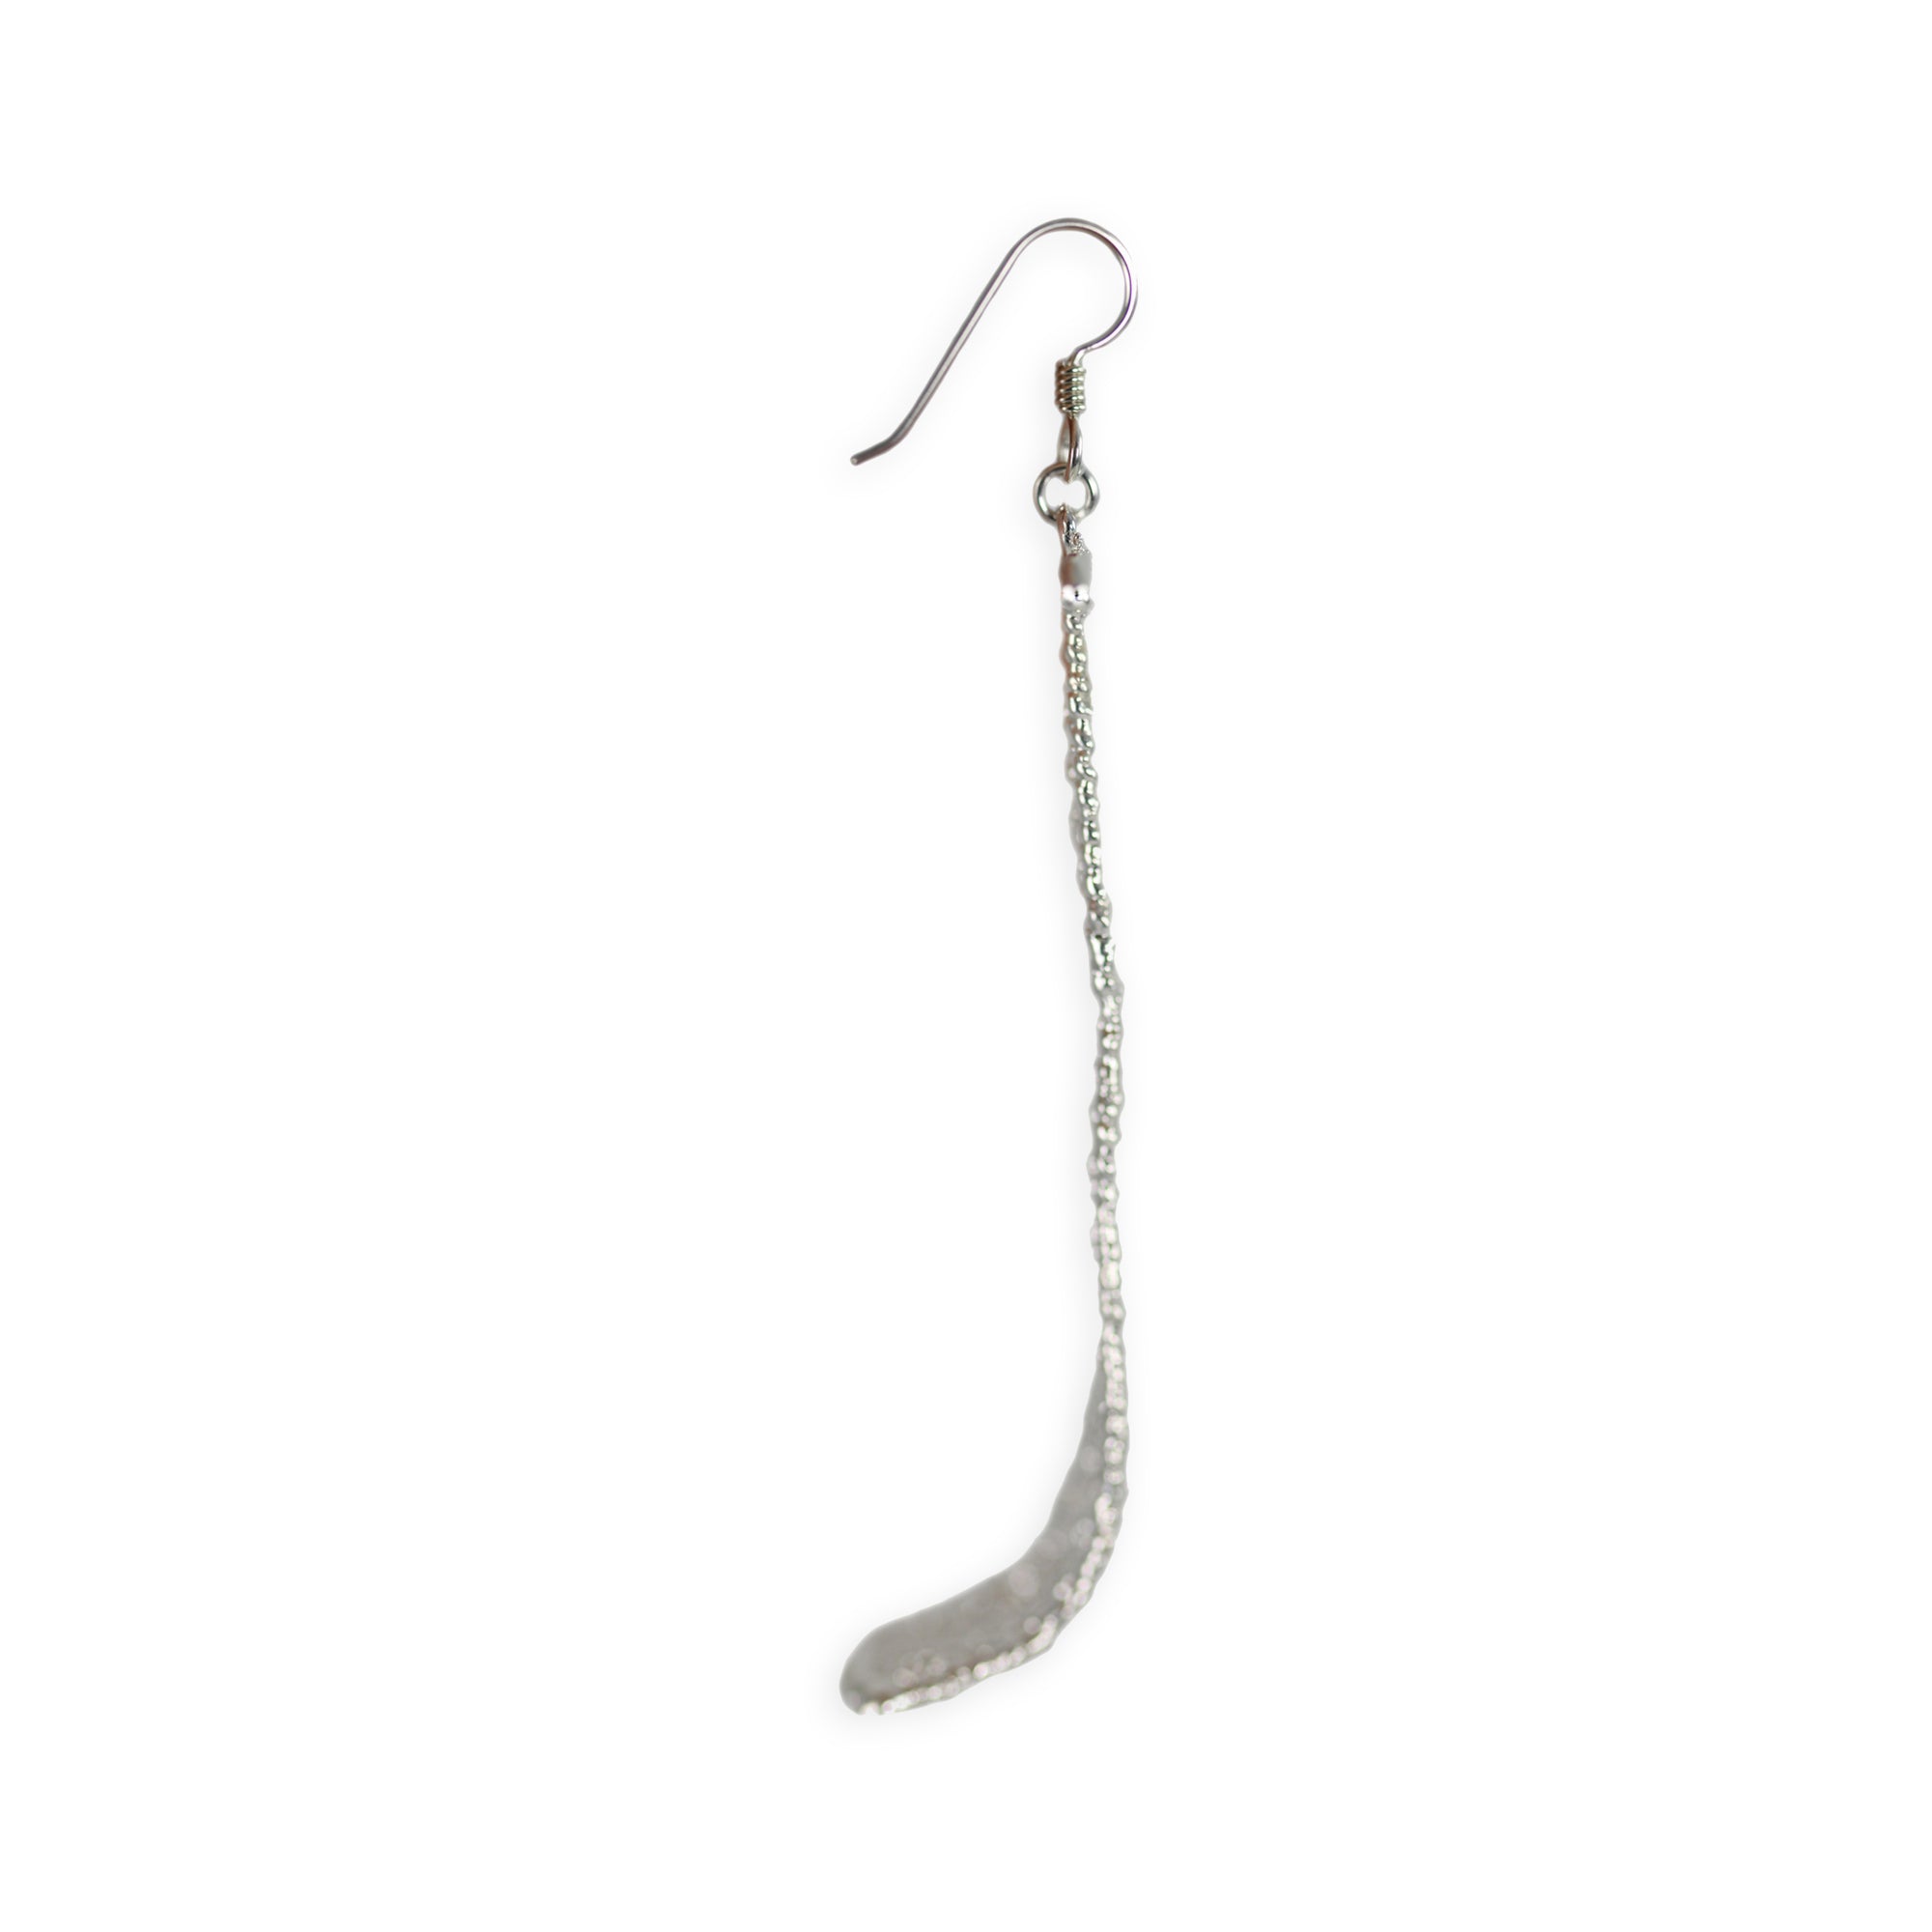 Lace earring in steriling silver on a French wire.